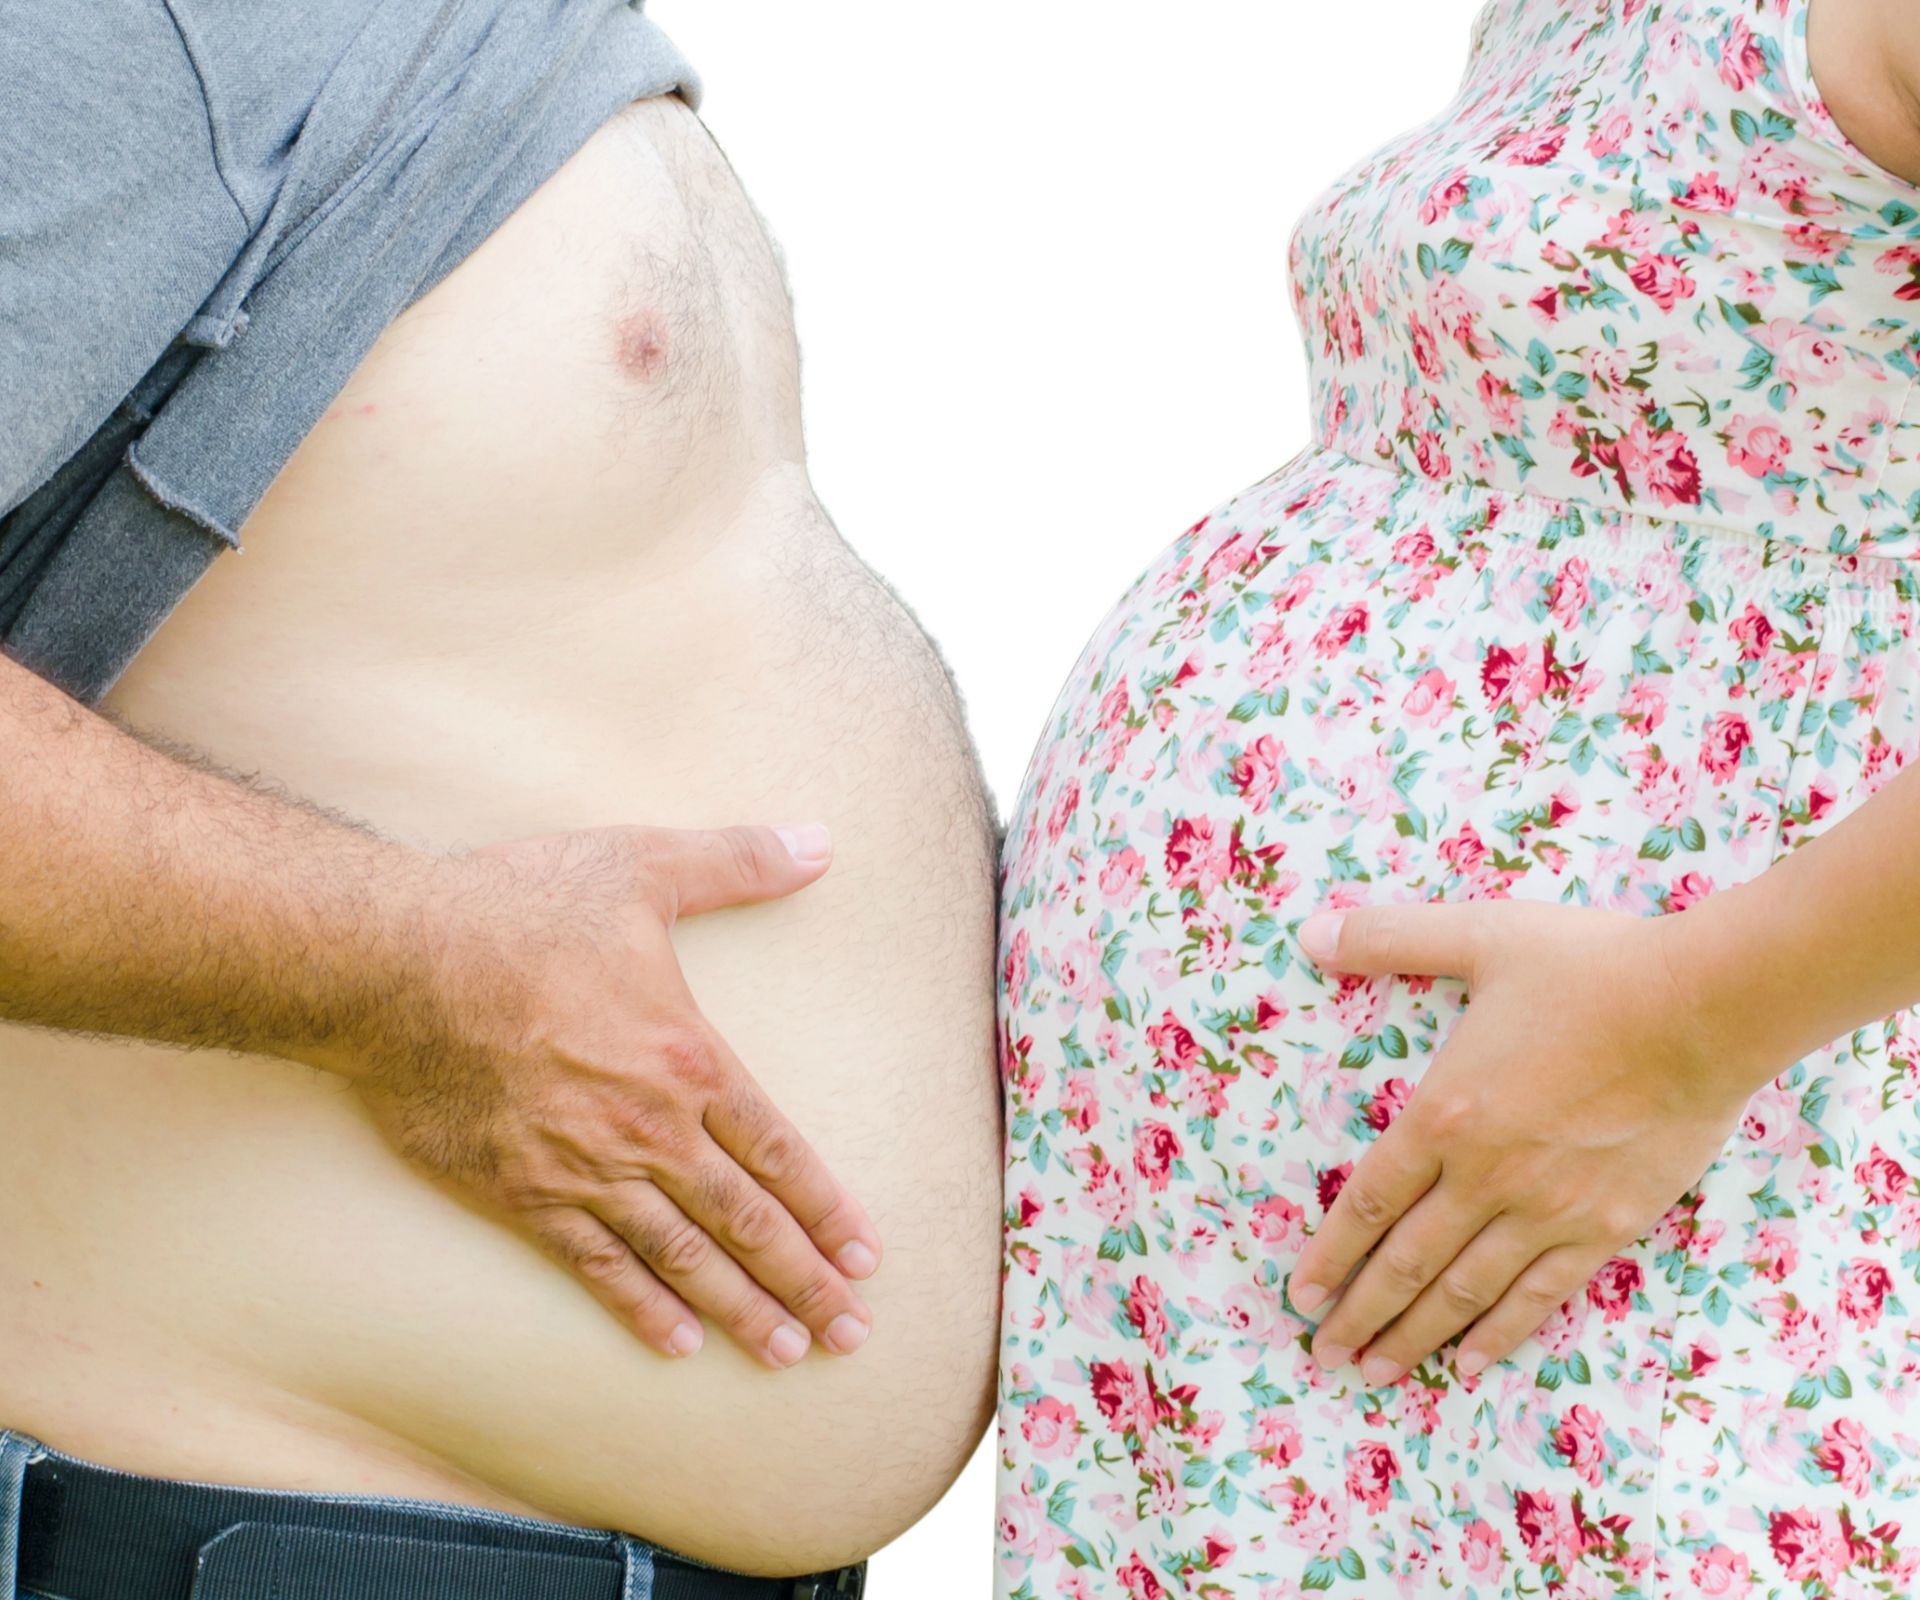 Men put on weight after becoming fathers